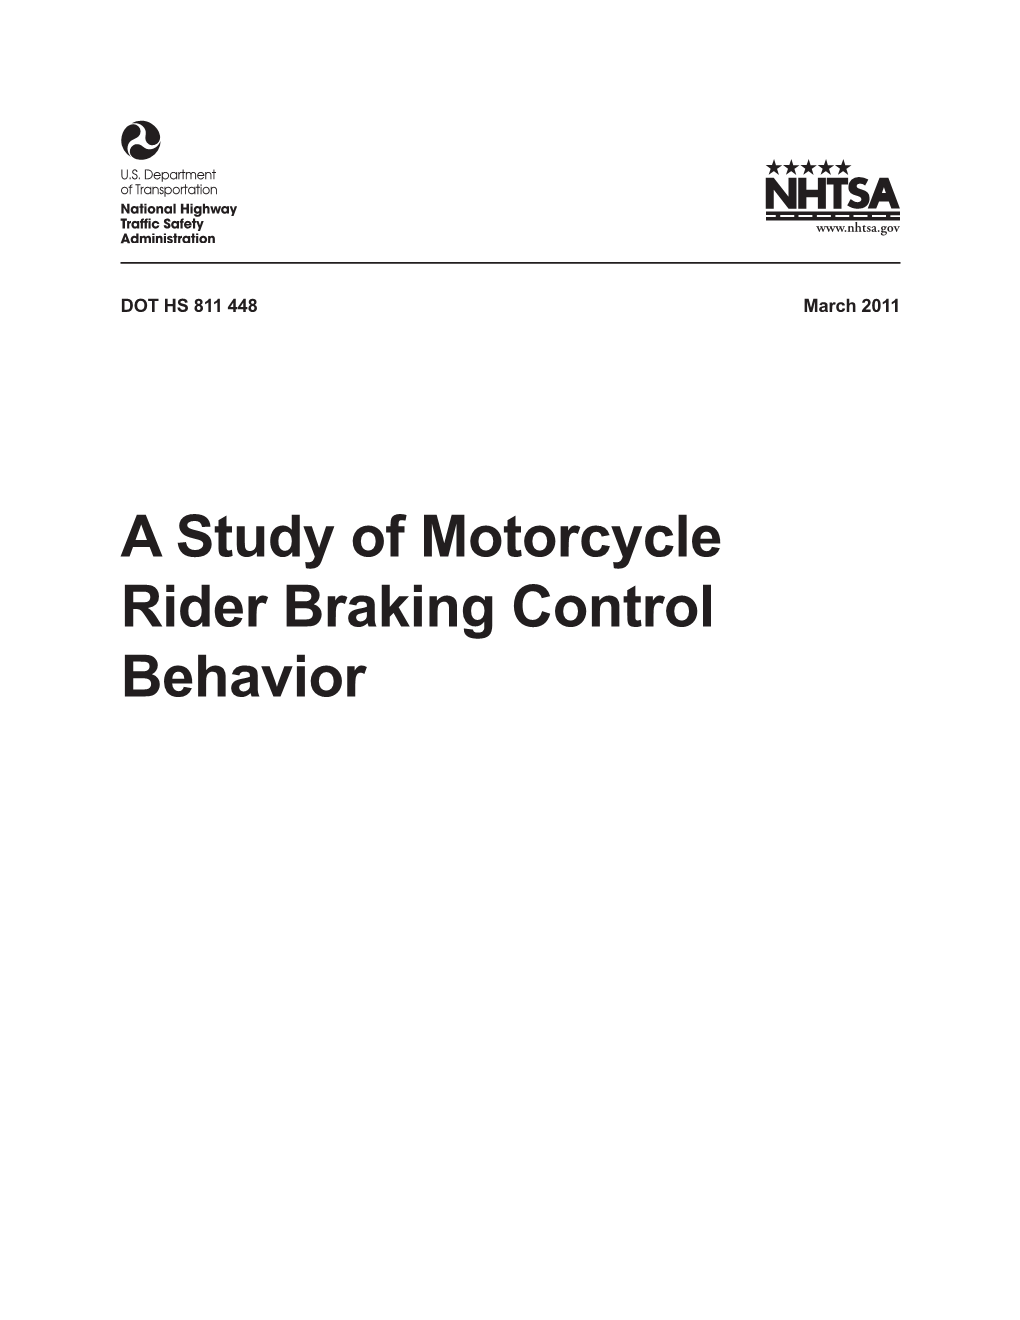 A Study of Motorcycle Rider Braking Control Behavior This Publication Is Distributed by the U.S